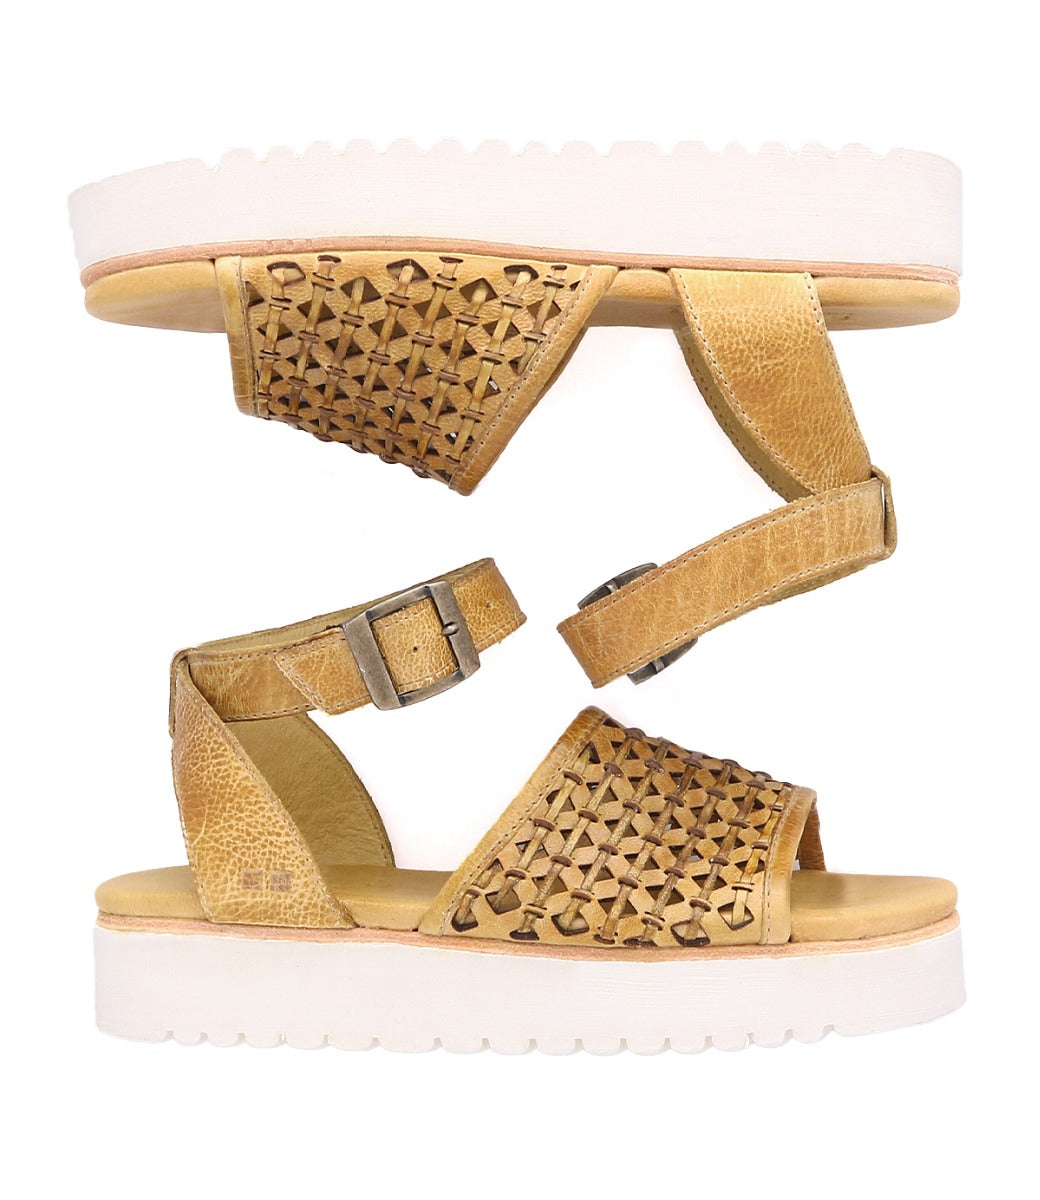 A pair of Brisa sandals by Bed Stu with white soles.